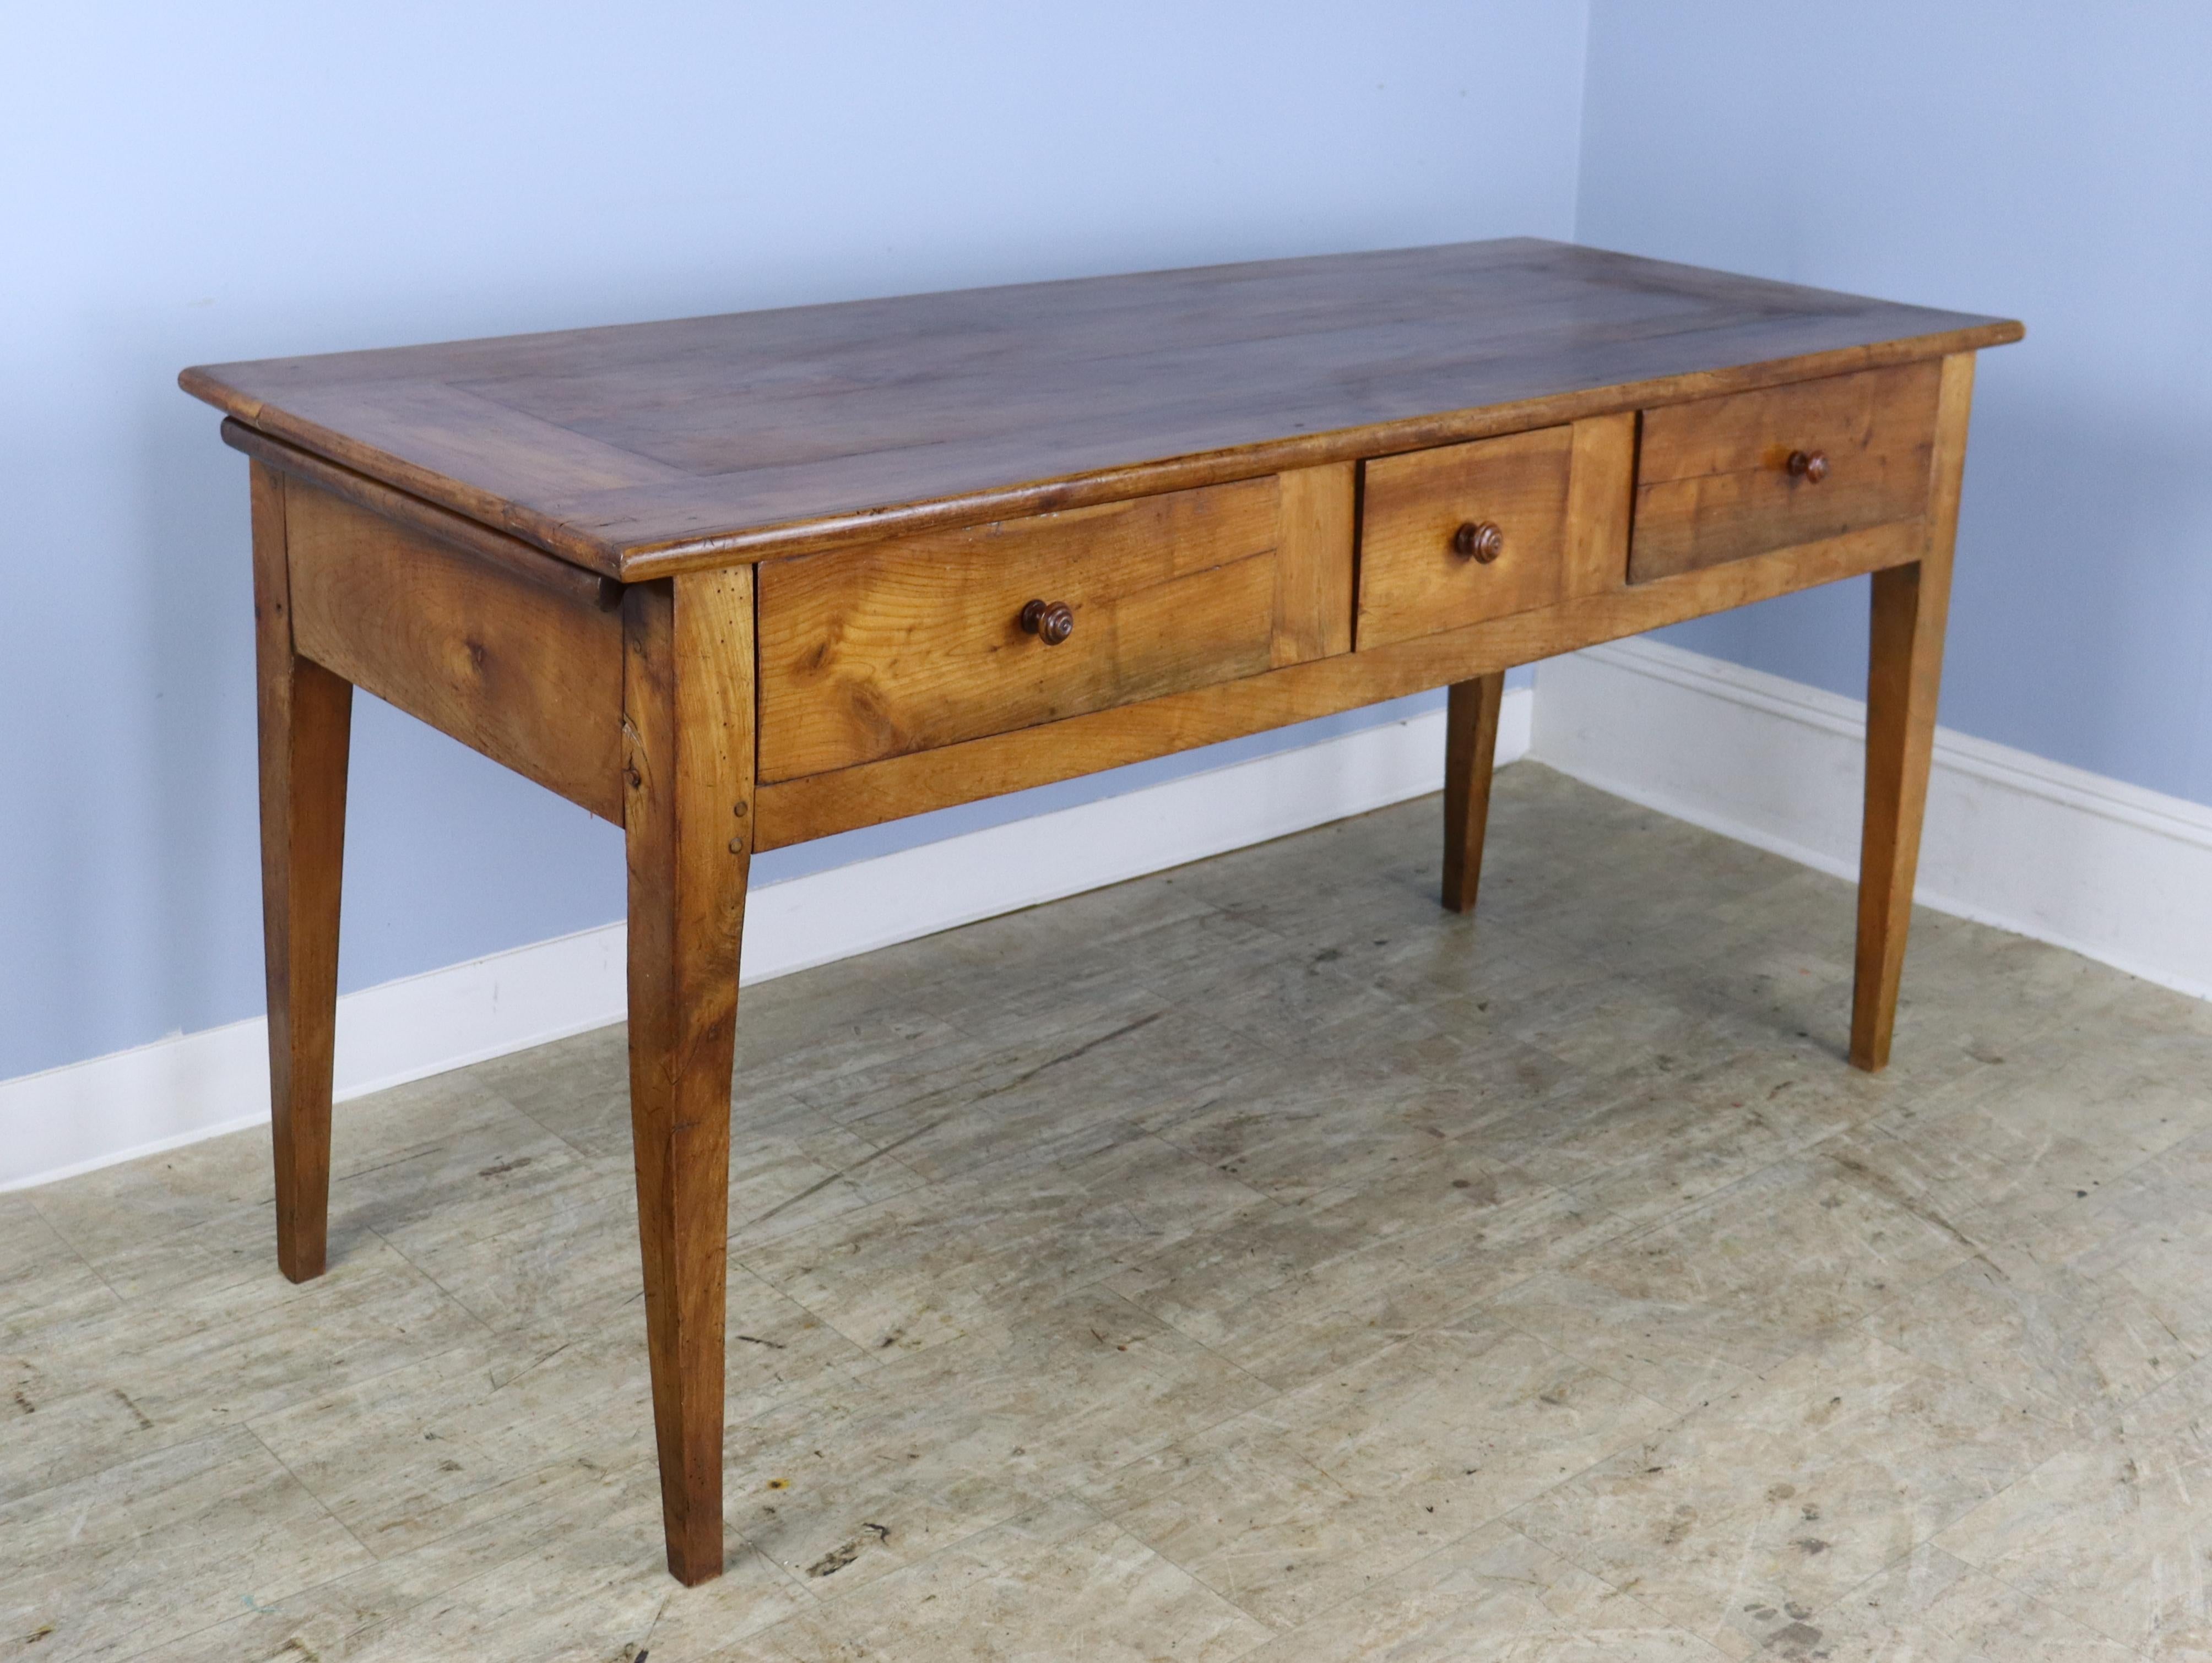 A simple three drawer server or console table in warm cherry. Classic tapered legs. very good color, grain, and patina on the top. Useful depth. Beautiful original breadslide creates another serving surface and looks cool.